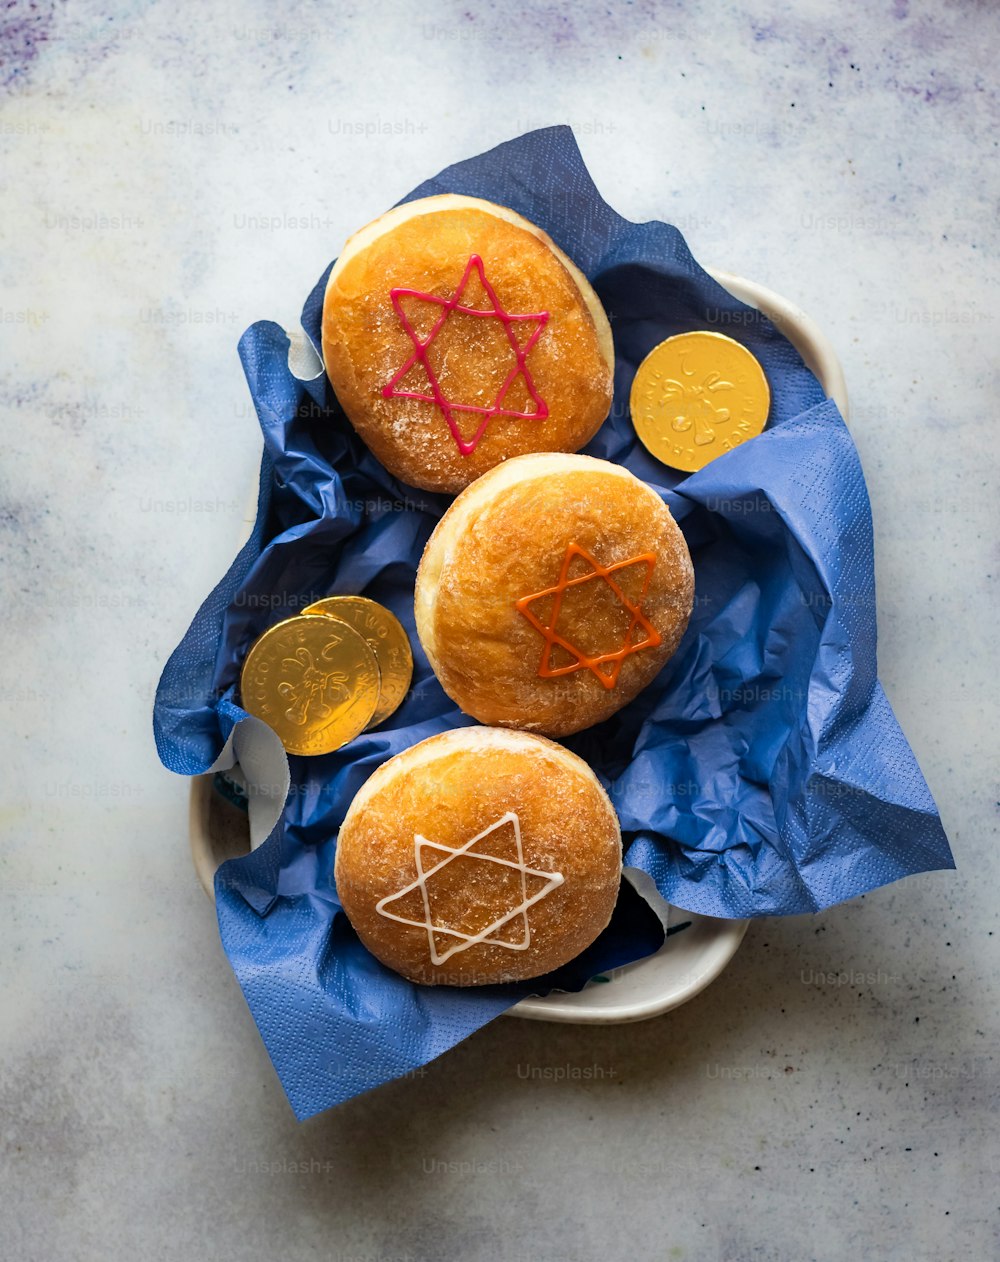 three donuts with a star of david on them